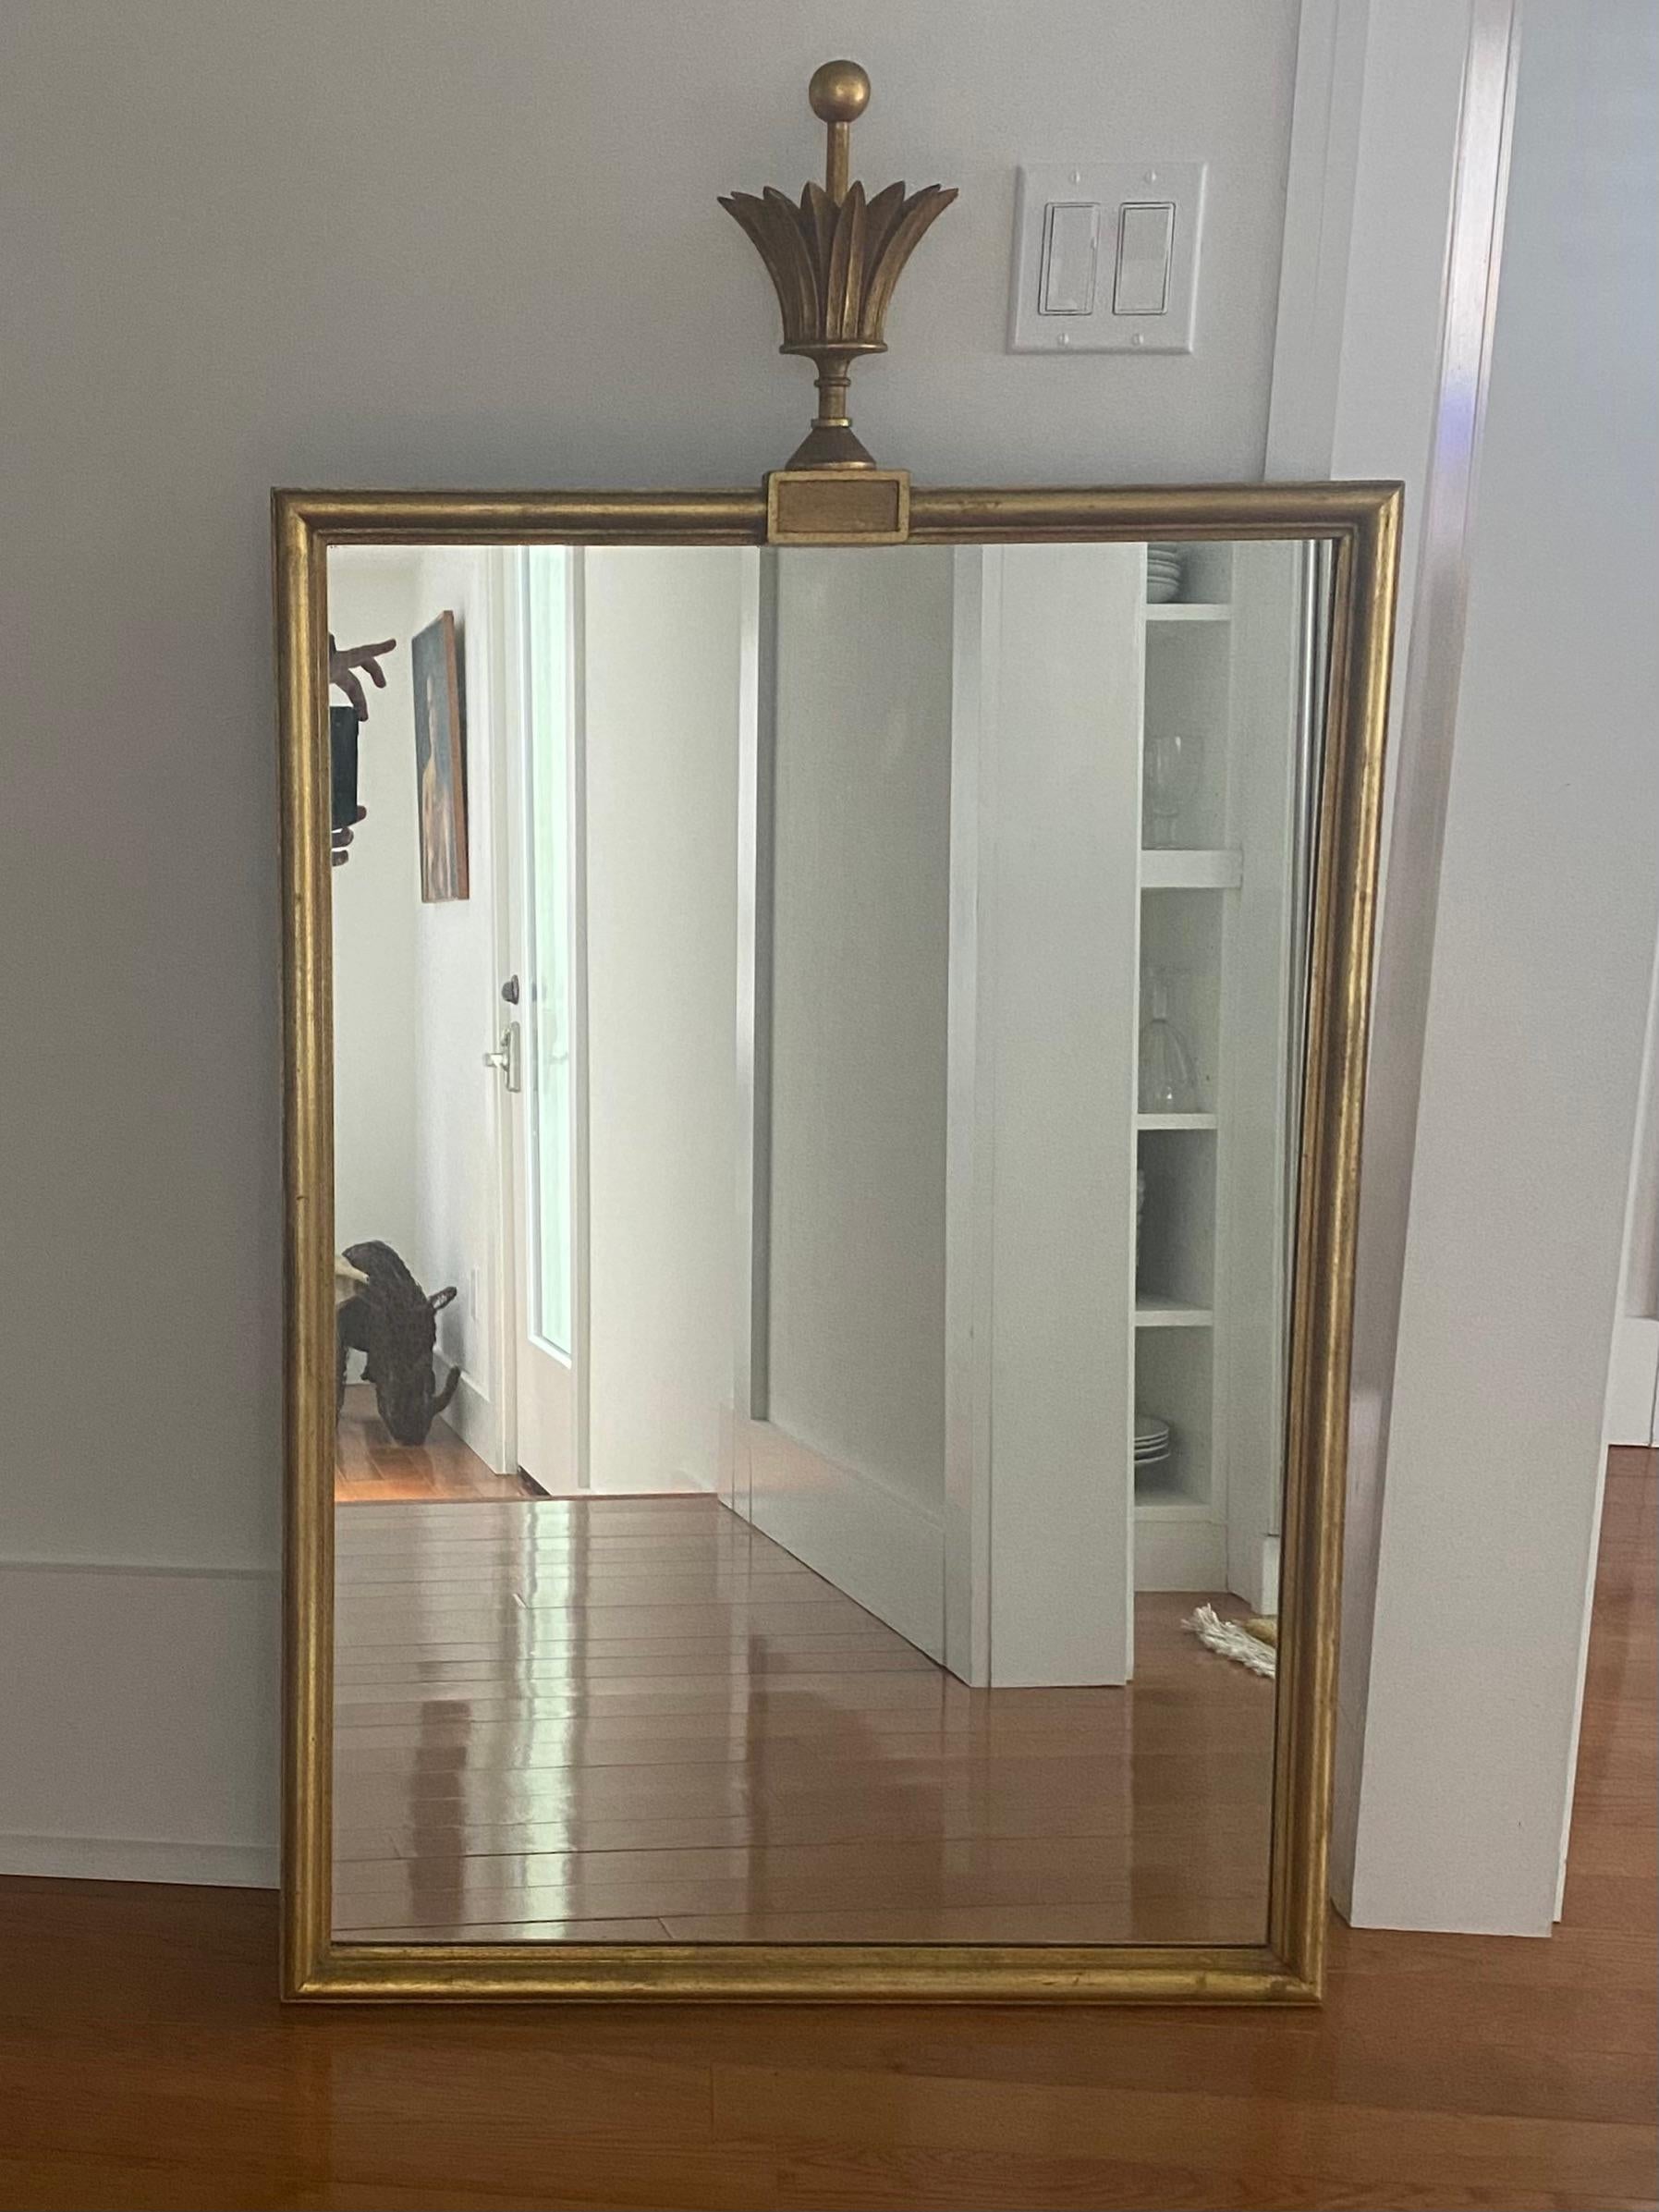 Tommi Parzinger rectangular mirror with crown finial.
Labeled on back with D. Milch and Son Inc.
approximately 28 x 40 inches plus 10 inch finial.